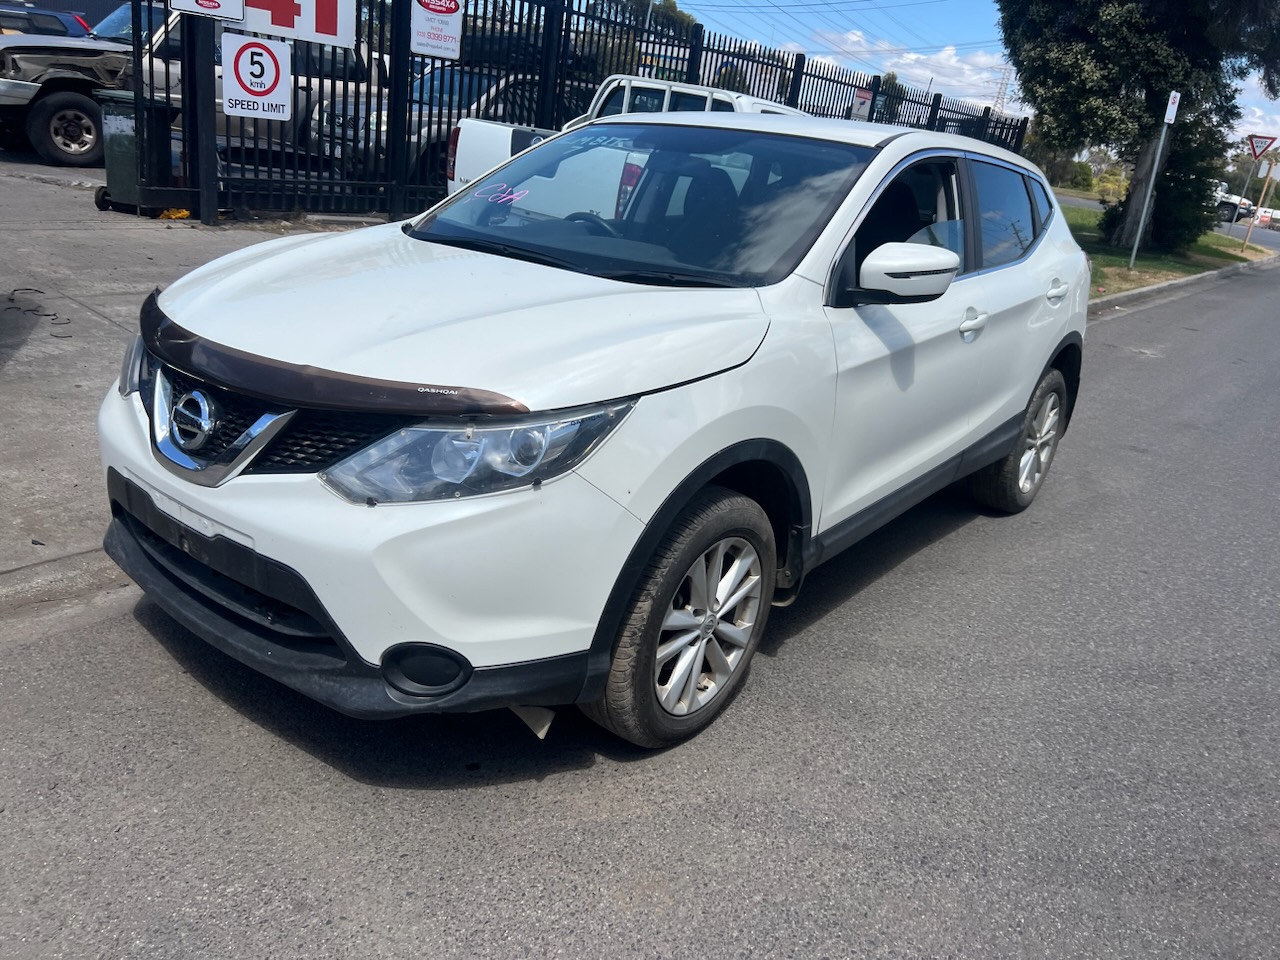 PARTS FOR SALE TO SUIT NISSAN QASHQAI J11 ST WHITE 2016 WRECKING / PARTING OUT / DISMANTLING.